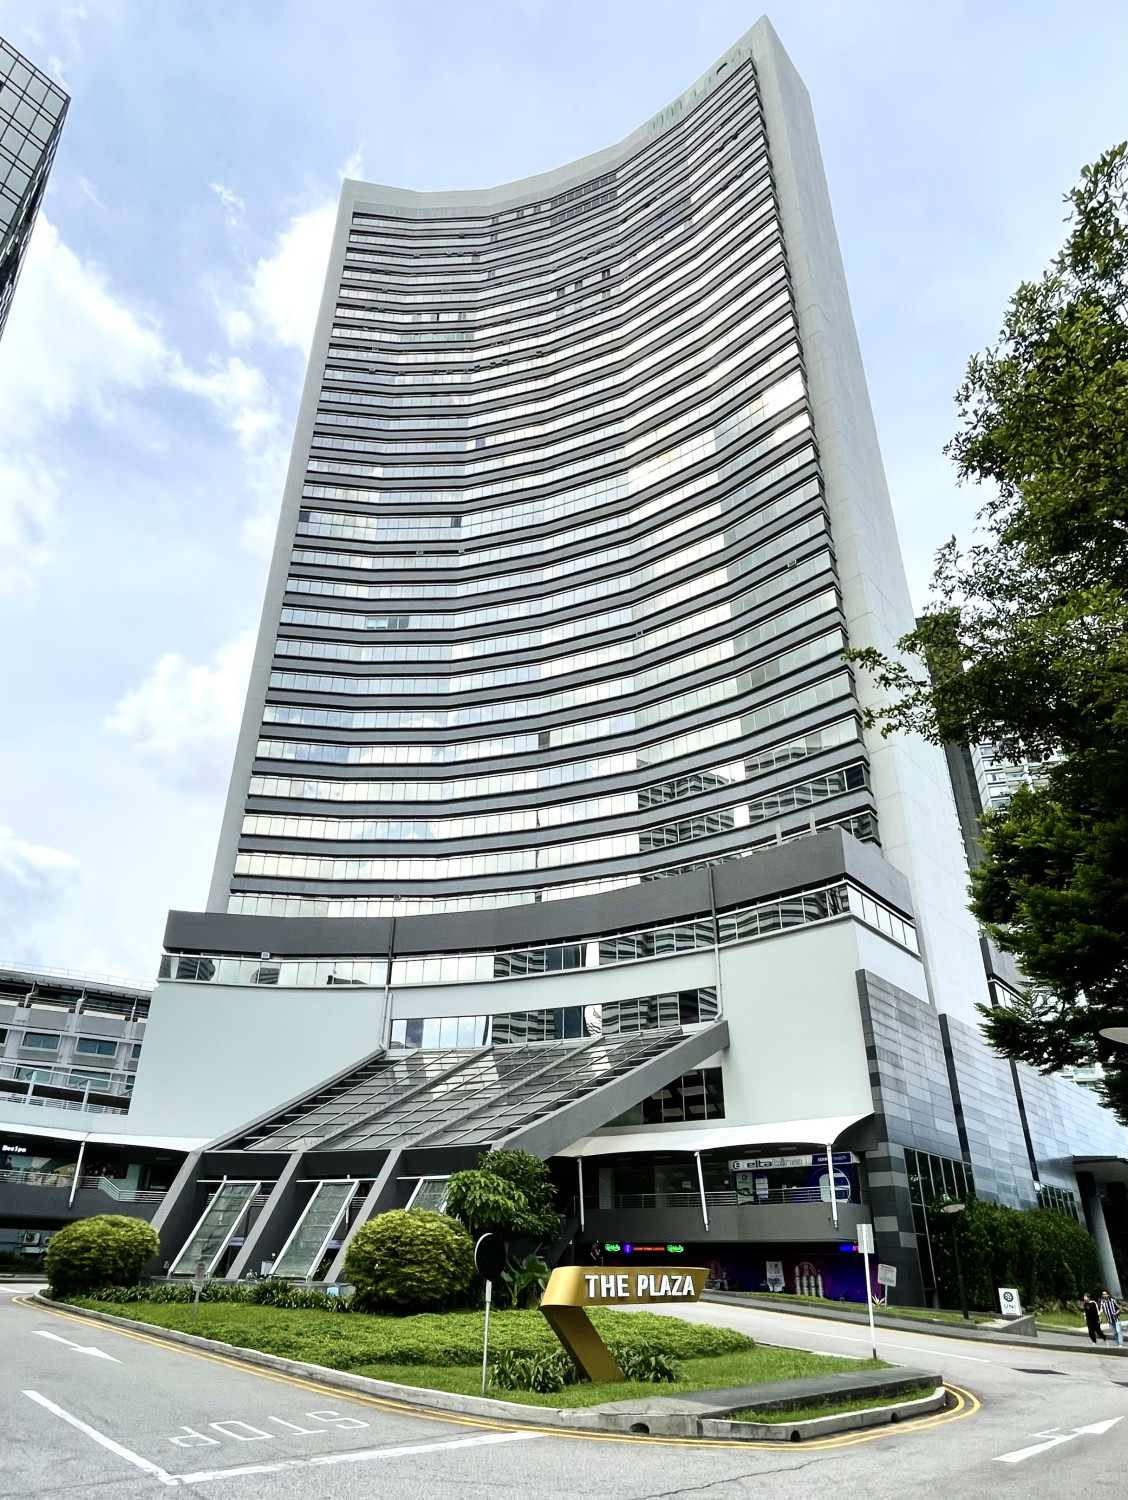 Strata office units at The Plaza for sale at $7.44 mil - Property News